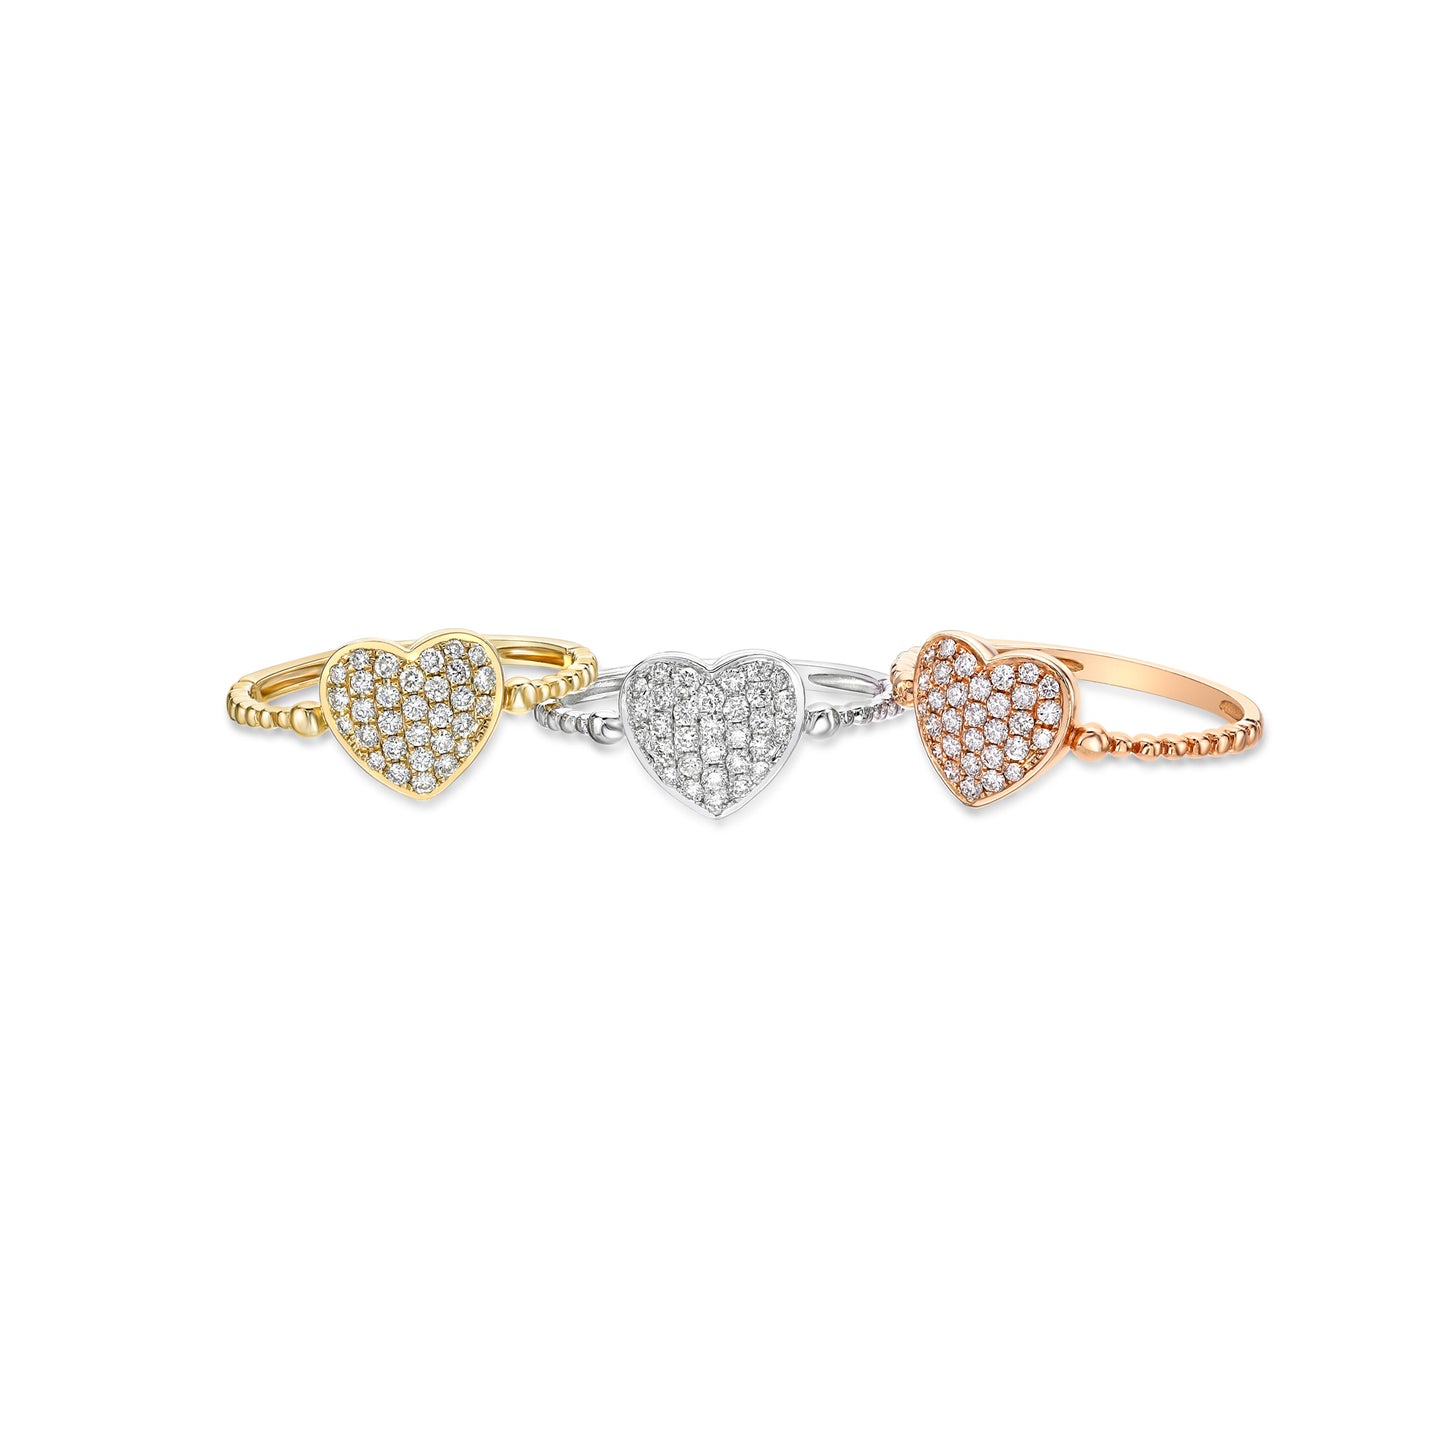 Multicolourway 18K Rose, White, and Yellow Gold Pave diamond Heart Rings